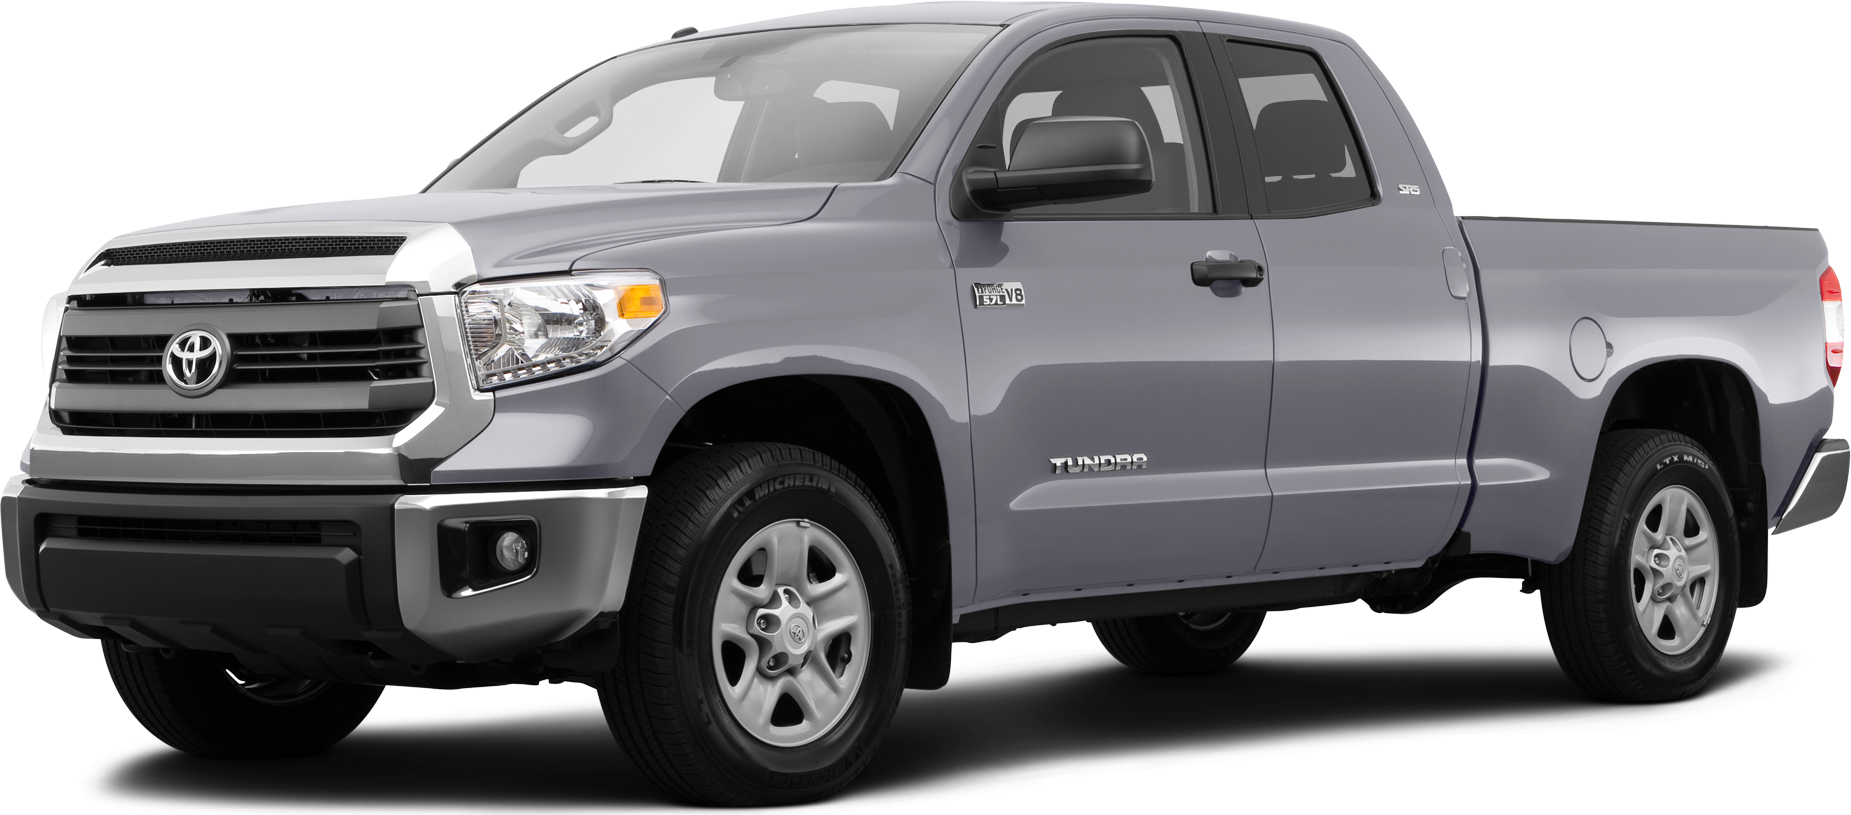 2014 Toyota Tundra Double Cab Price, Value, Ratings & Reviews 